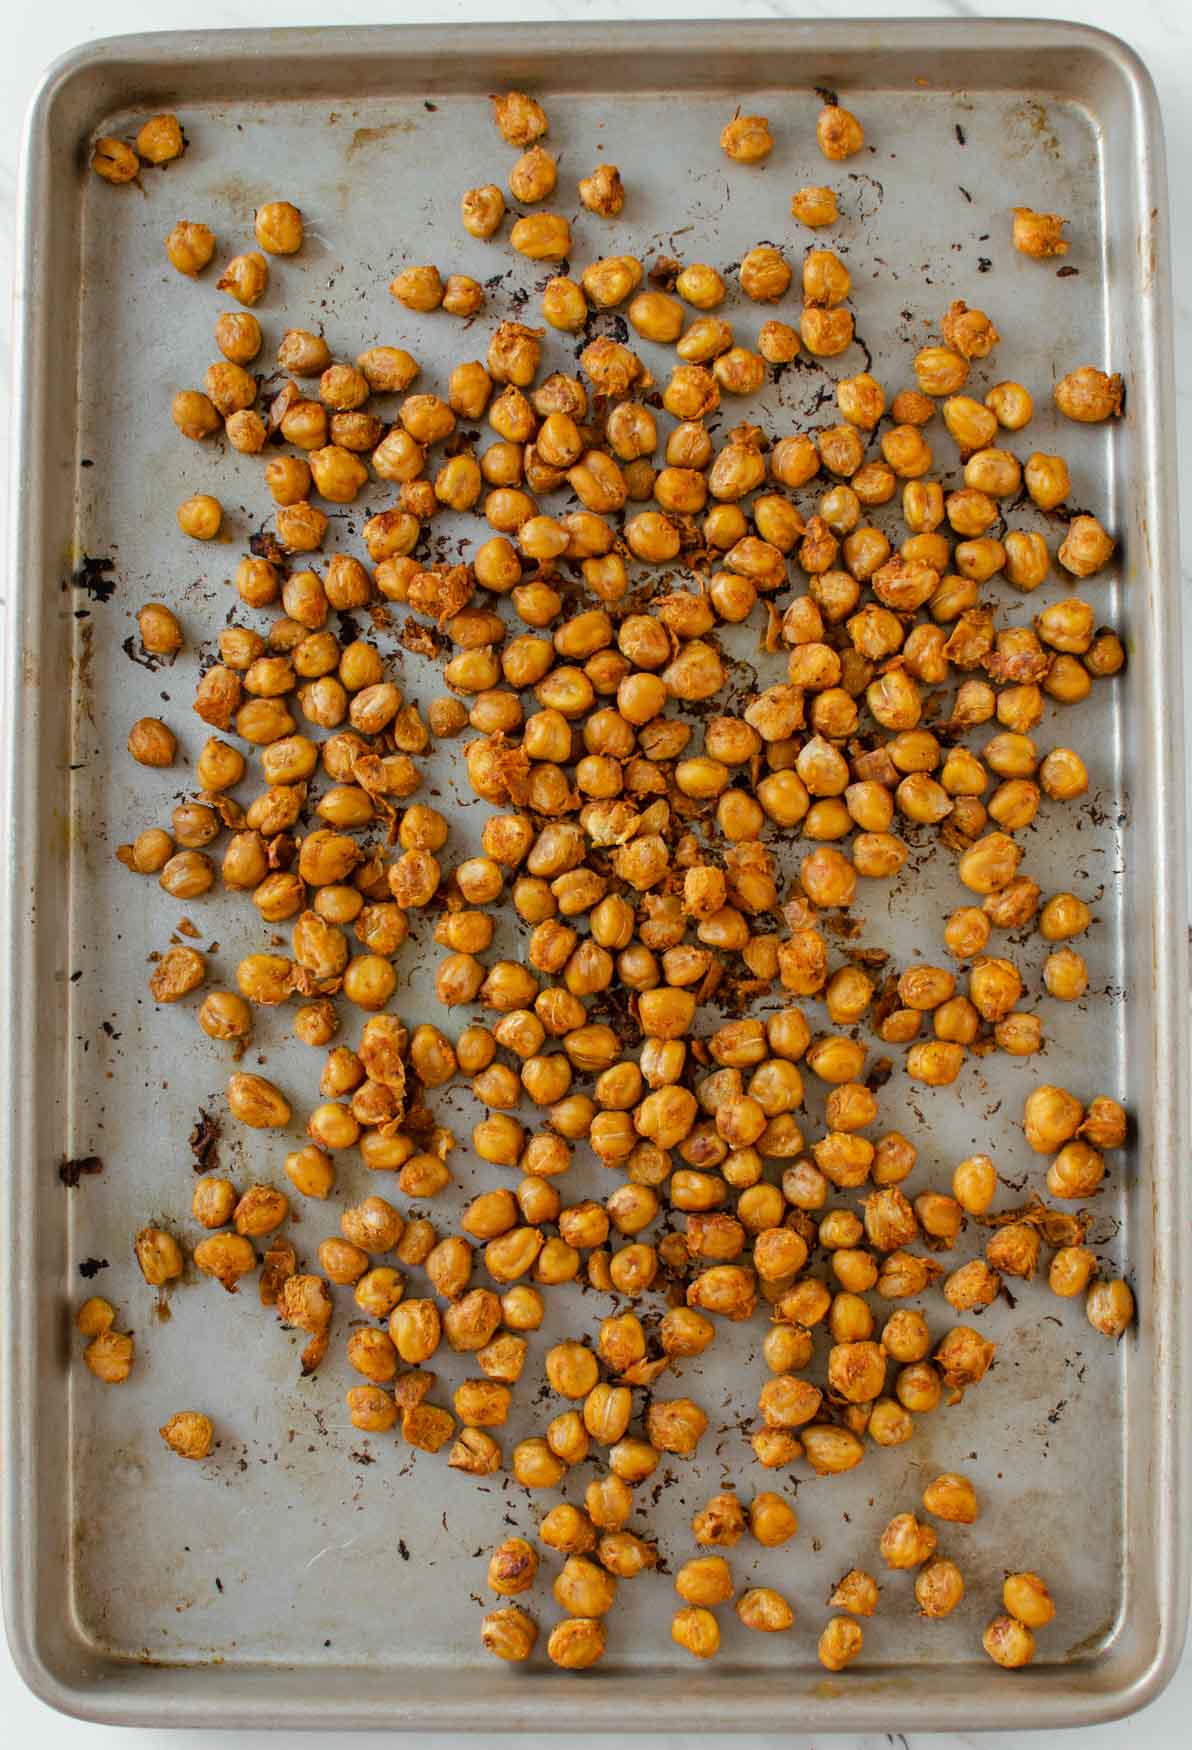 Chickpeas marinated with authentic Indian spices and then toasted in the oven for making Chickpea Tikka Masala.